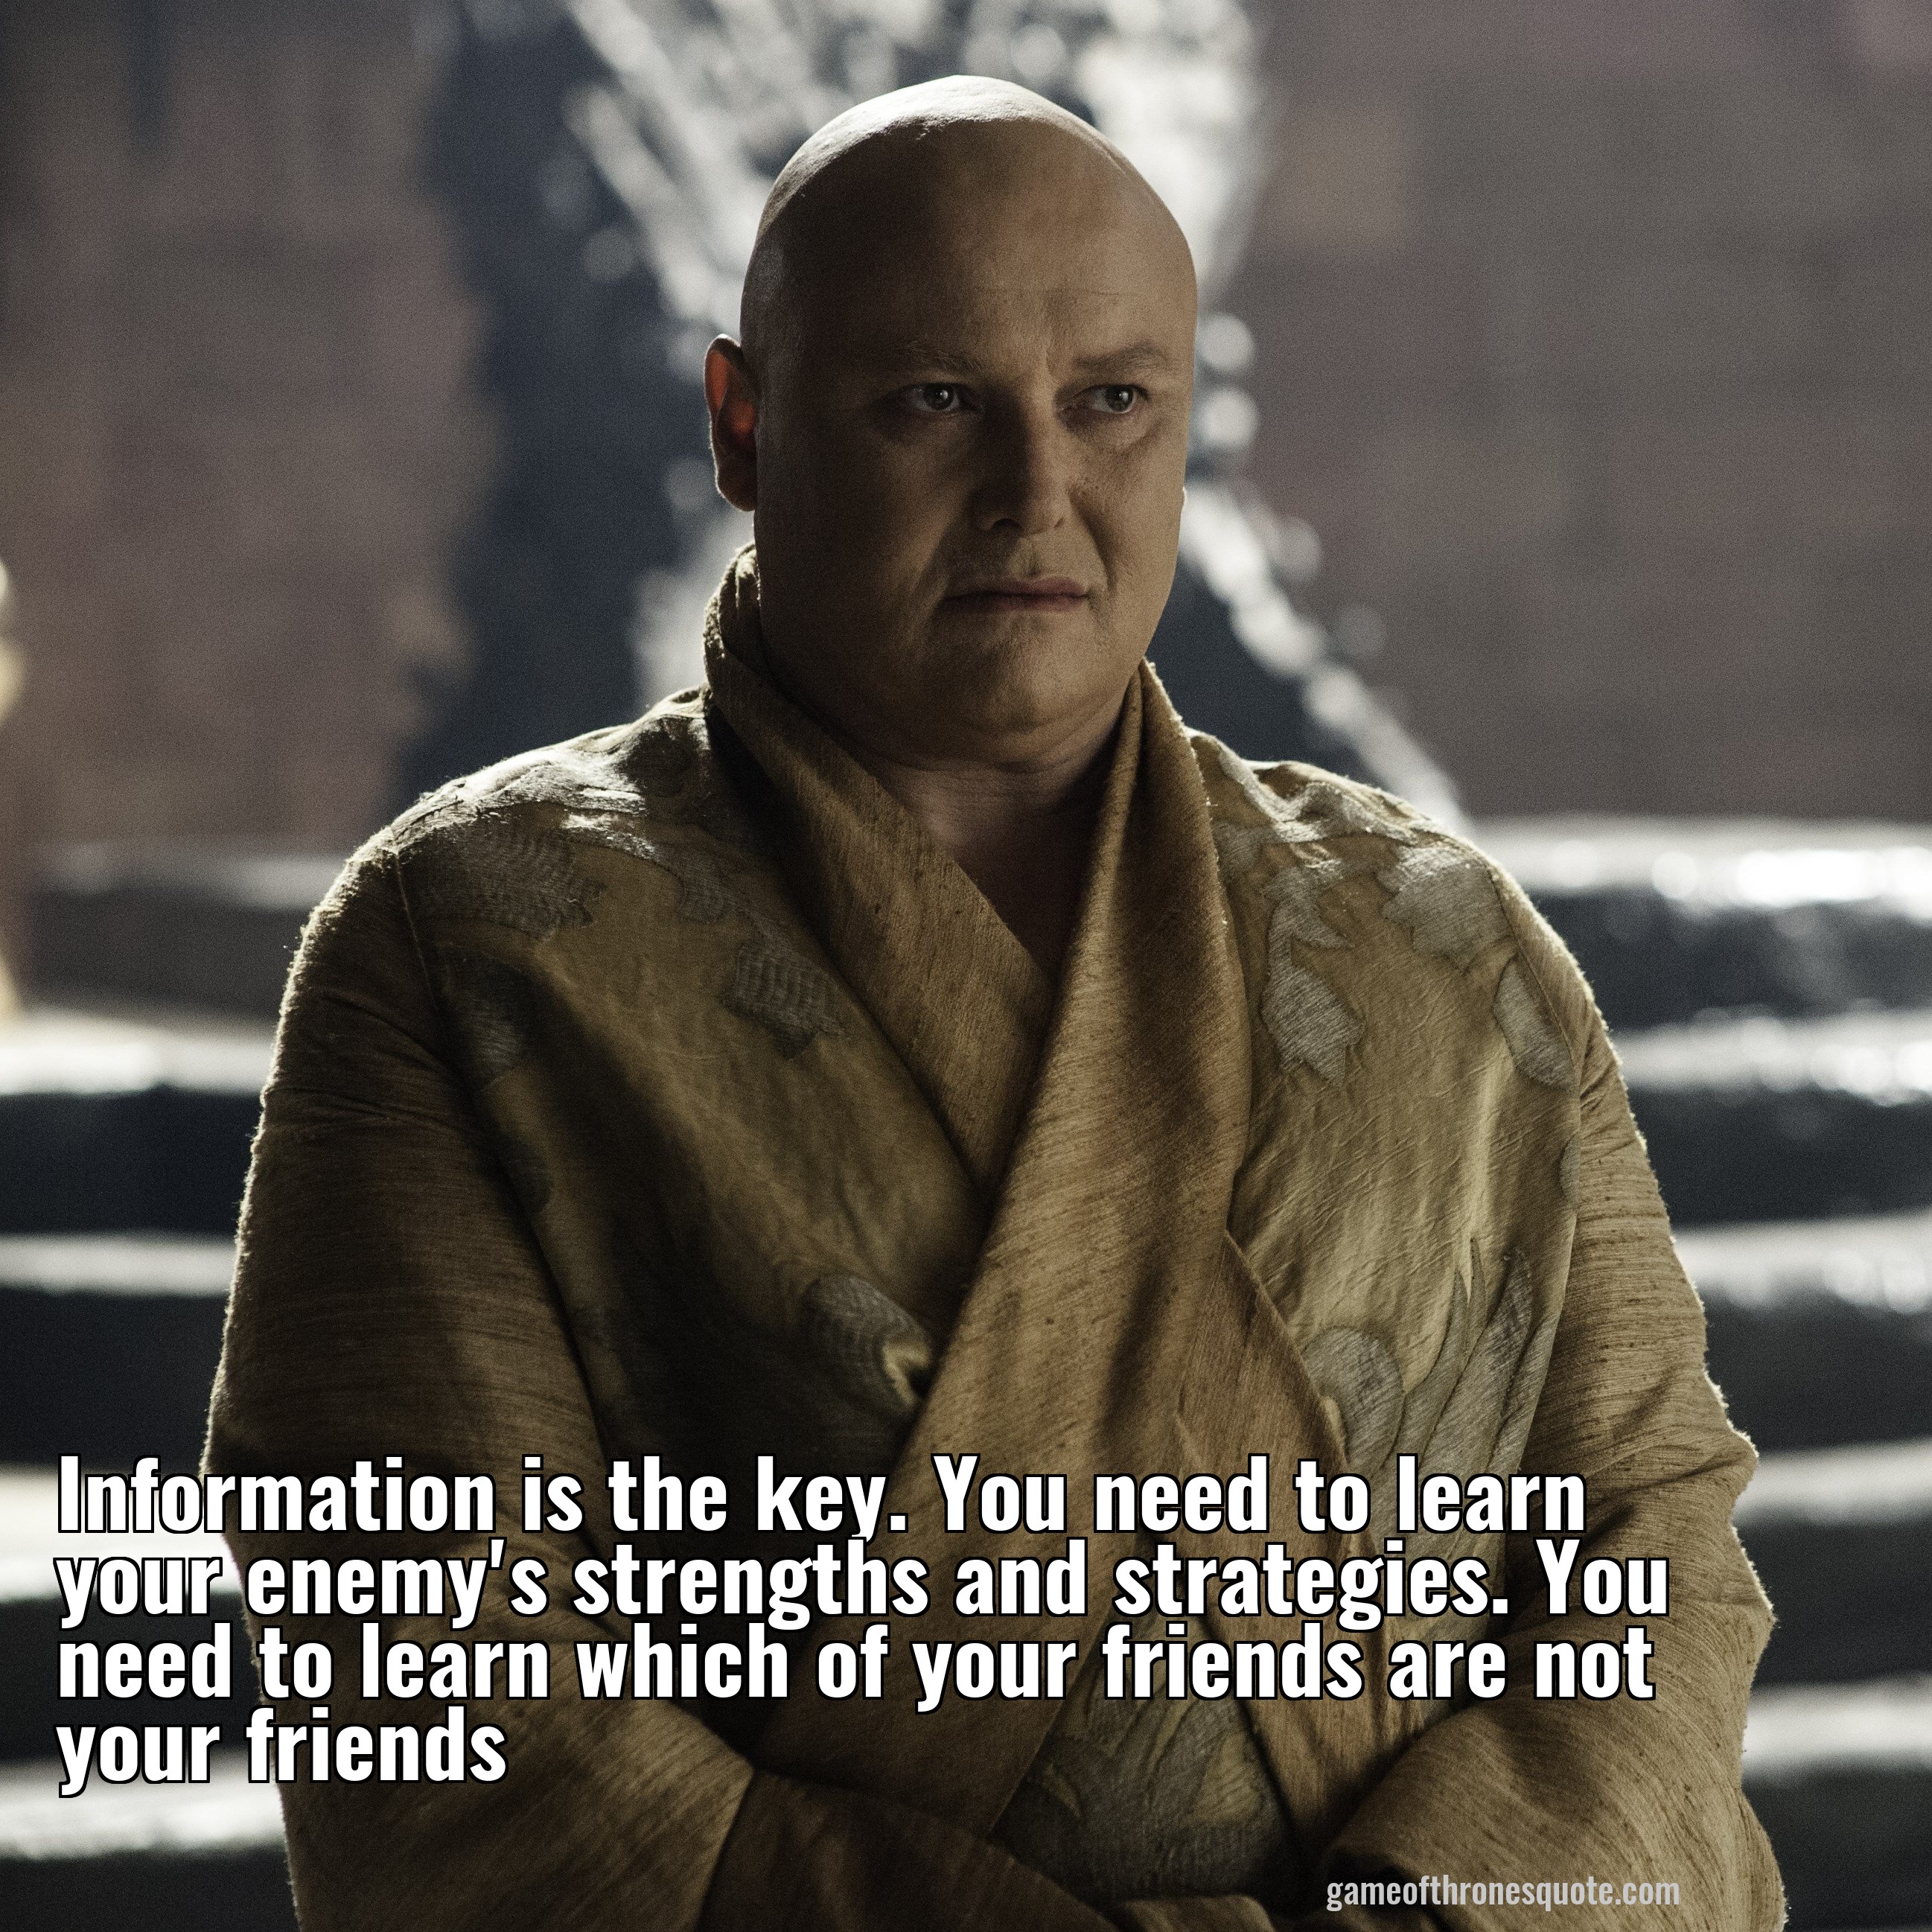 Information is the key. You need to learn your enemy's strengths and strategies. You need to learn which of your friends are not your friends